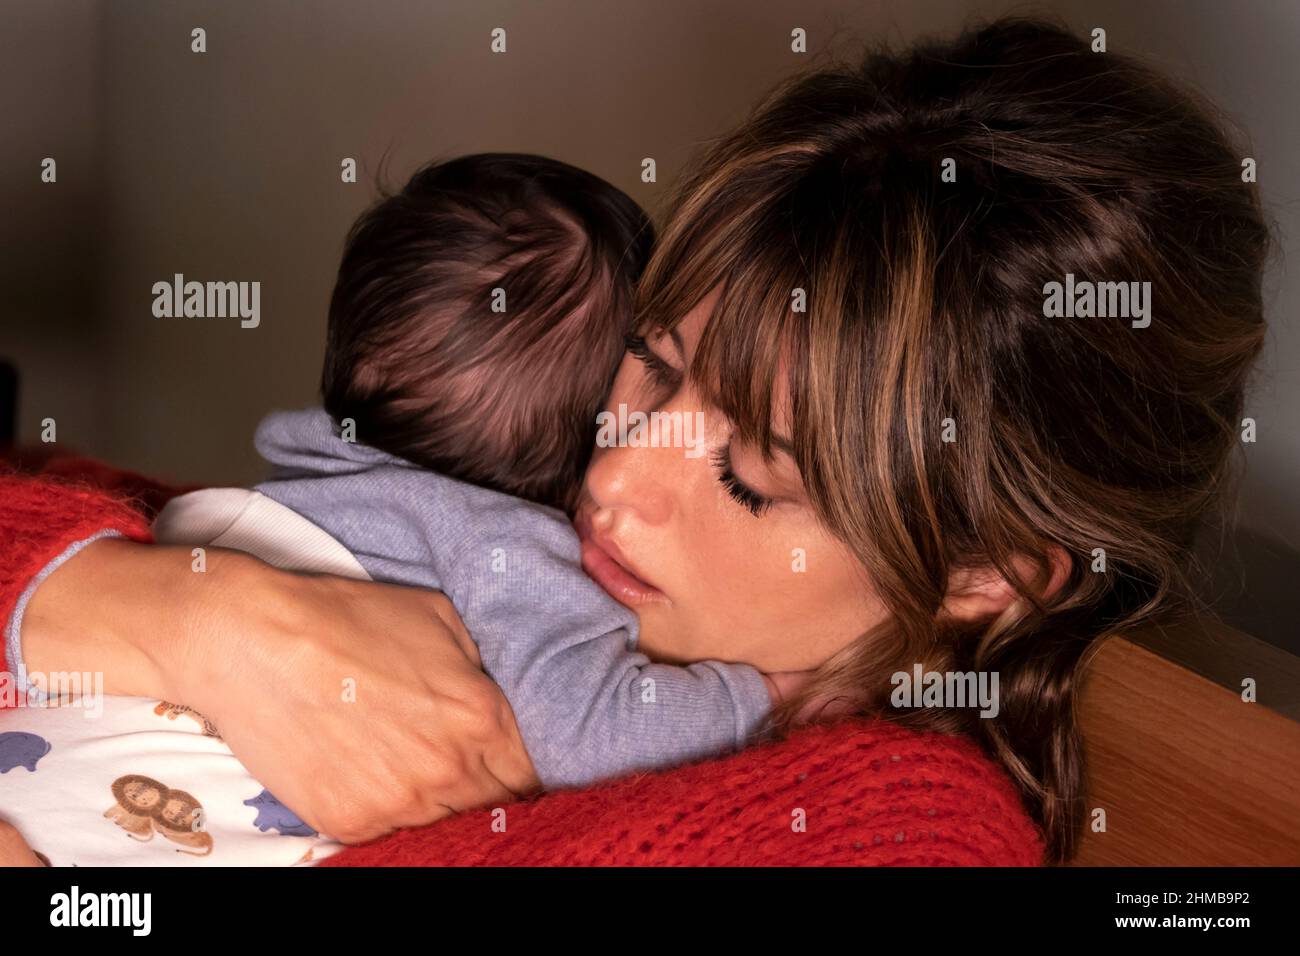 Parallel Mothers (2021) directed by Pedro Almodóvar and starring Penélope Cruz, Aitana Sánchez-Gijón and Rossy de Palma. The story of two mothers who give birth the same day. Stock Photo